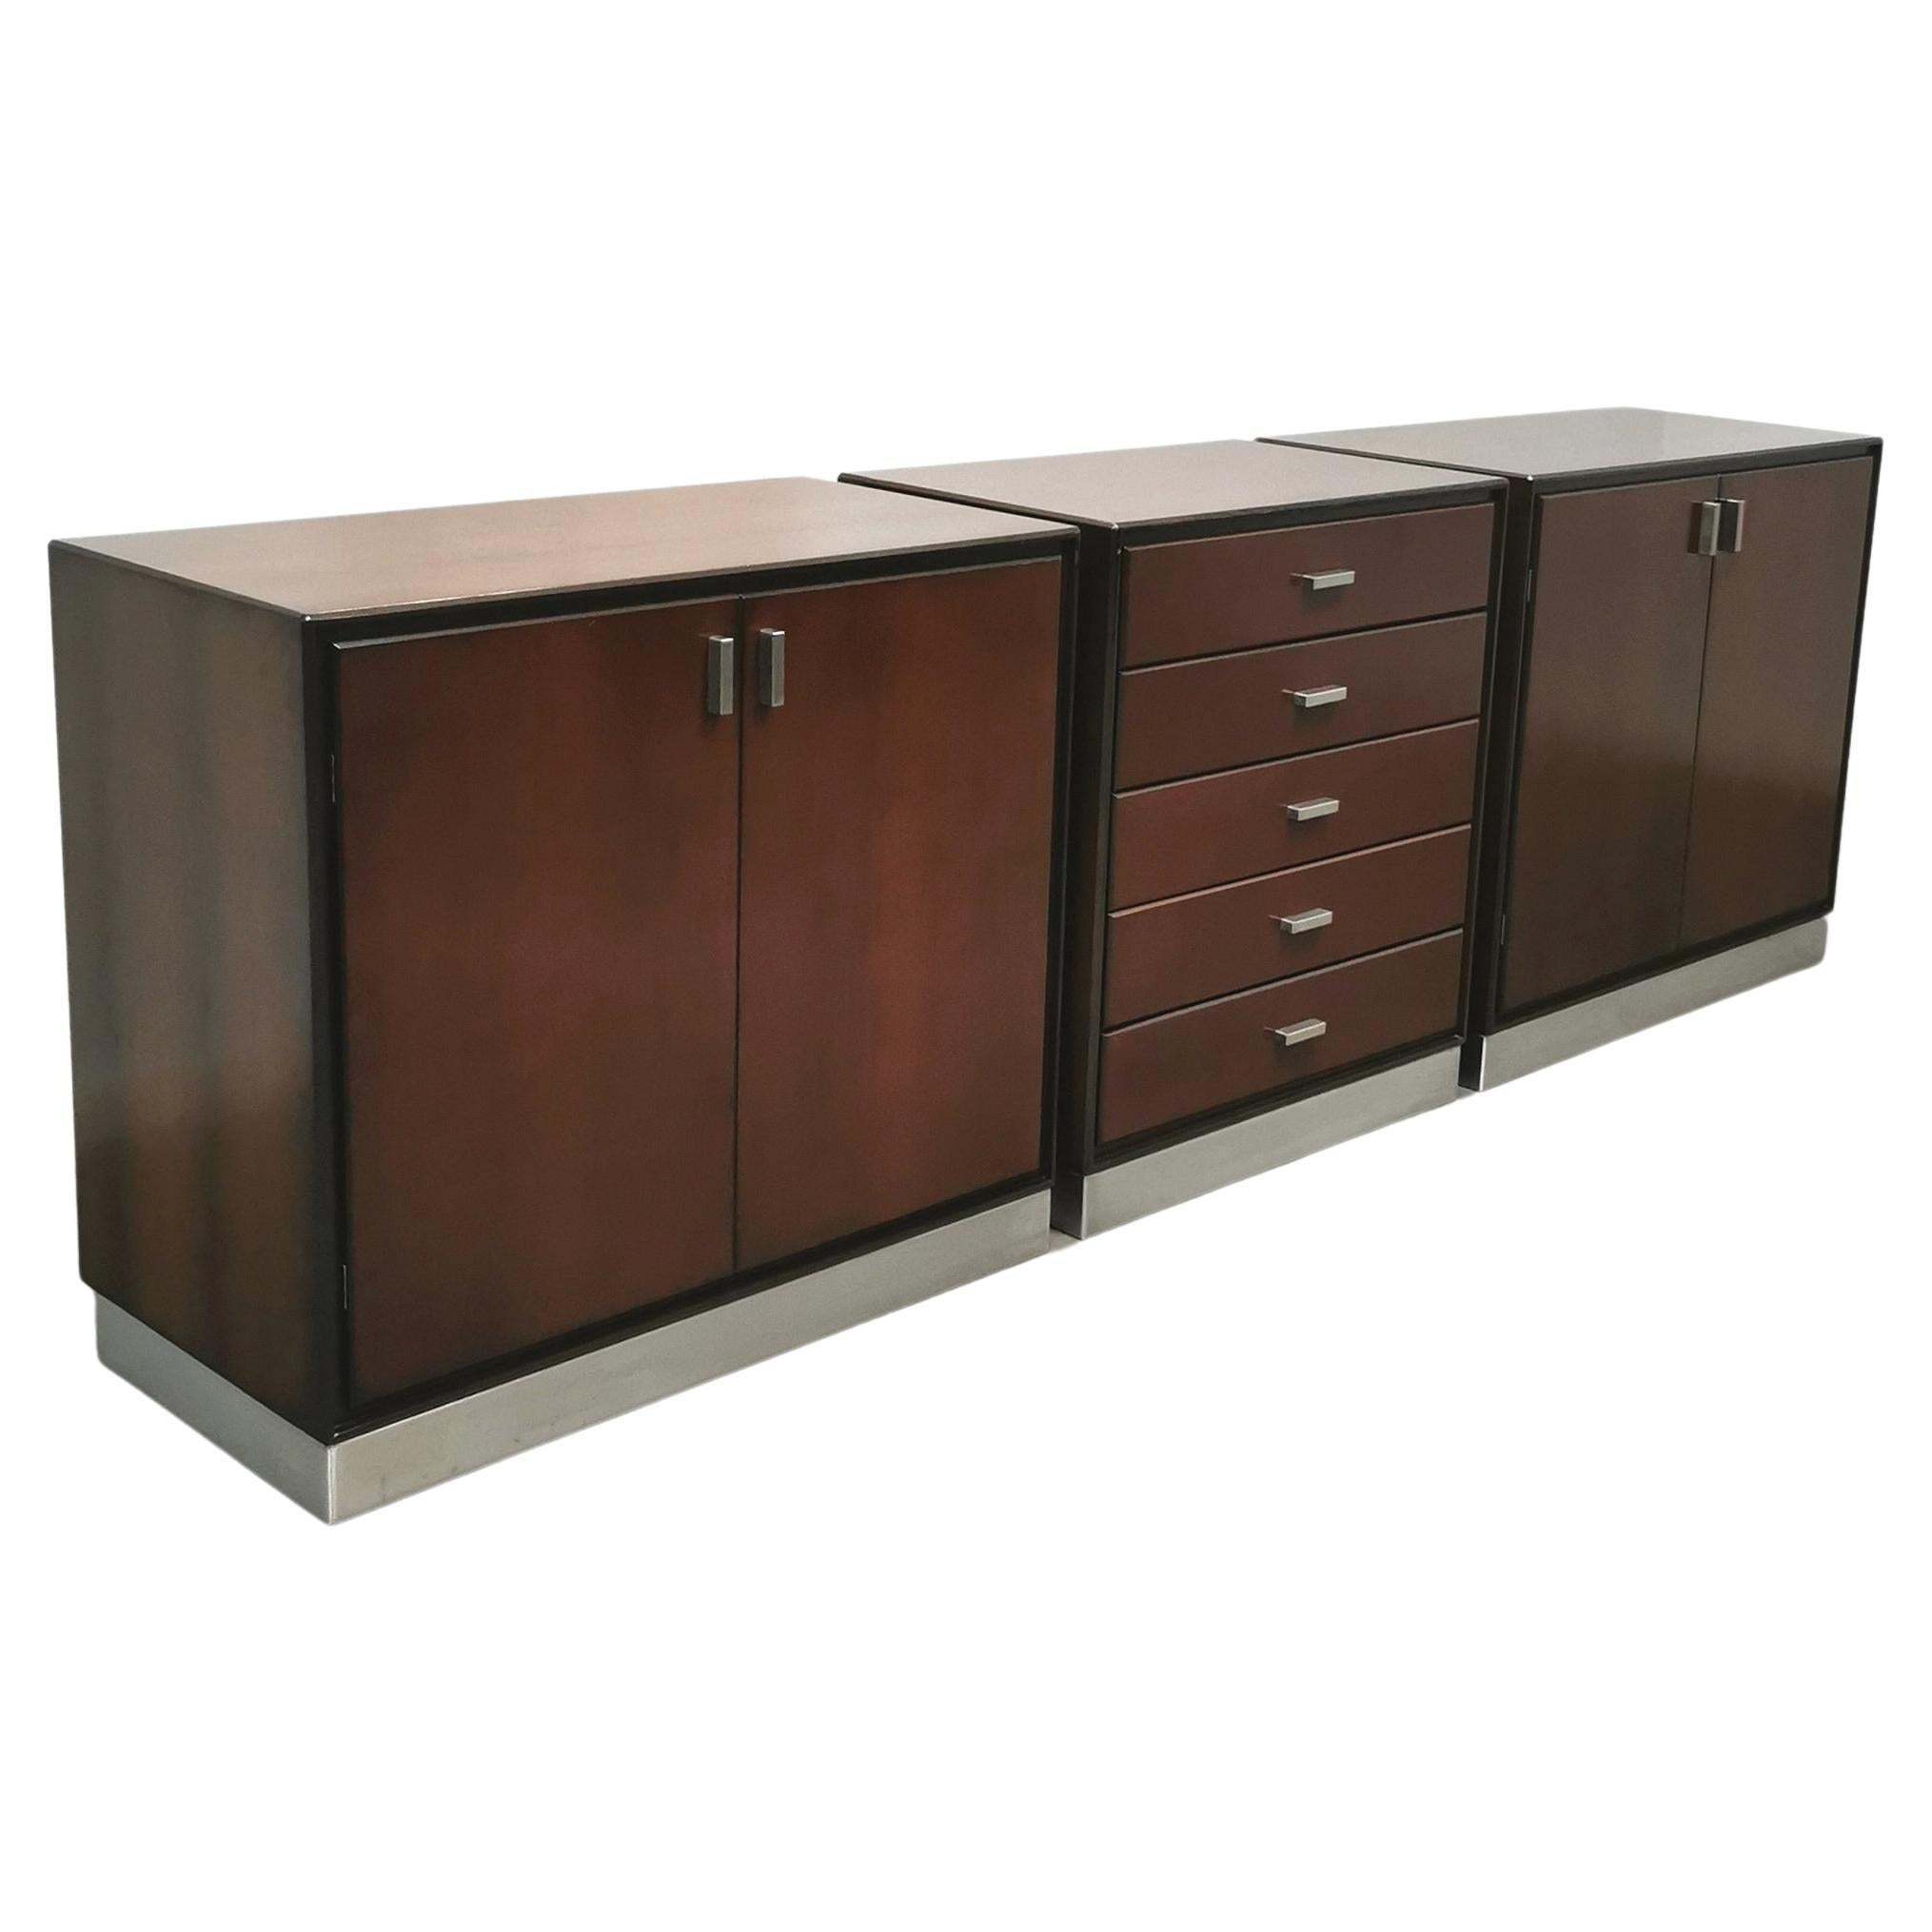 Set of 2 buffets and 1 chest of drawers designed by Gianni Moscatelli and produced by the Italian company Formanova in the 70s.
The set consists of 2 buffets with 2 doors for each piece and 1 chest of drawers with 5 wooden drawers, supported by an